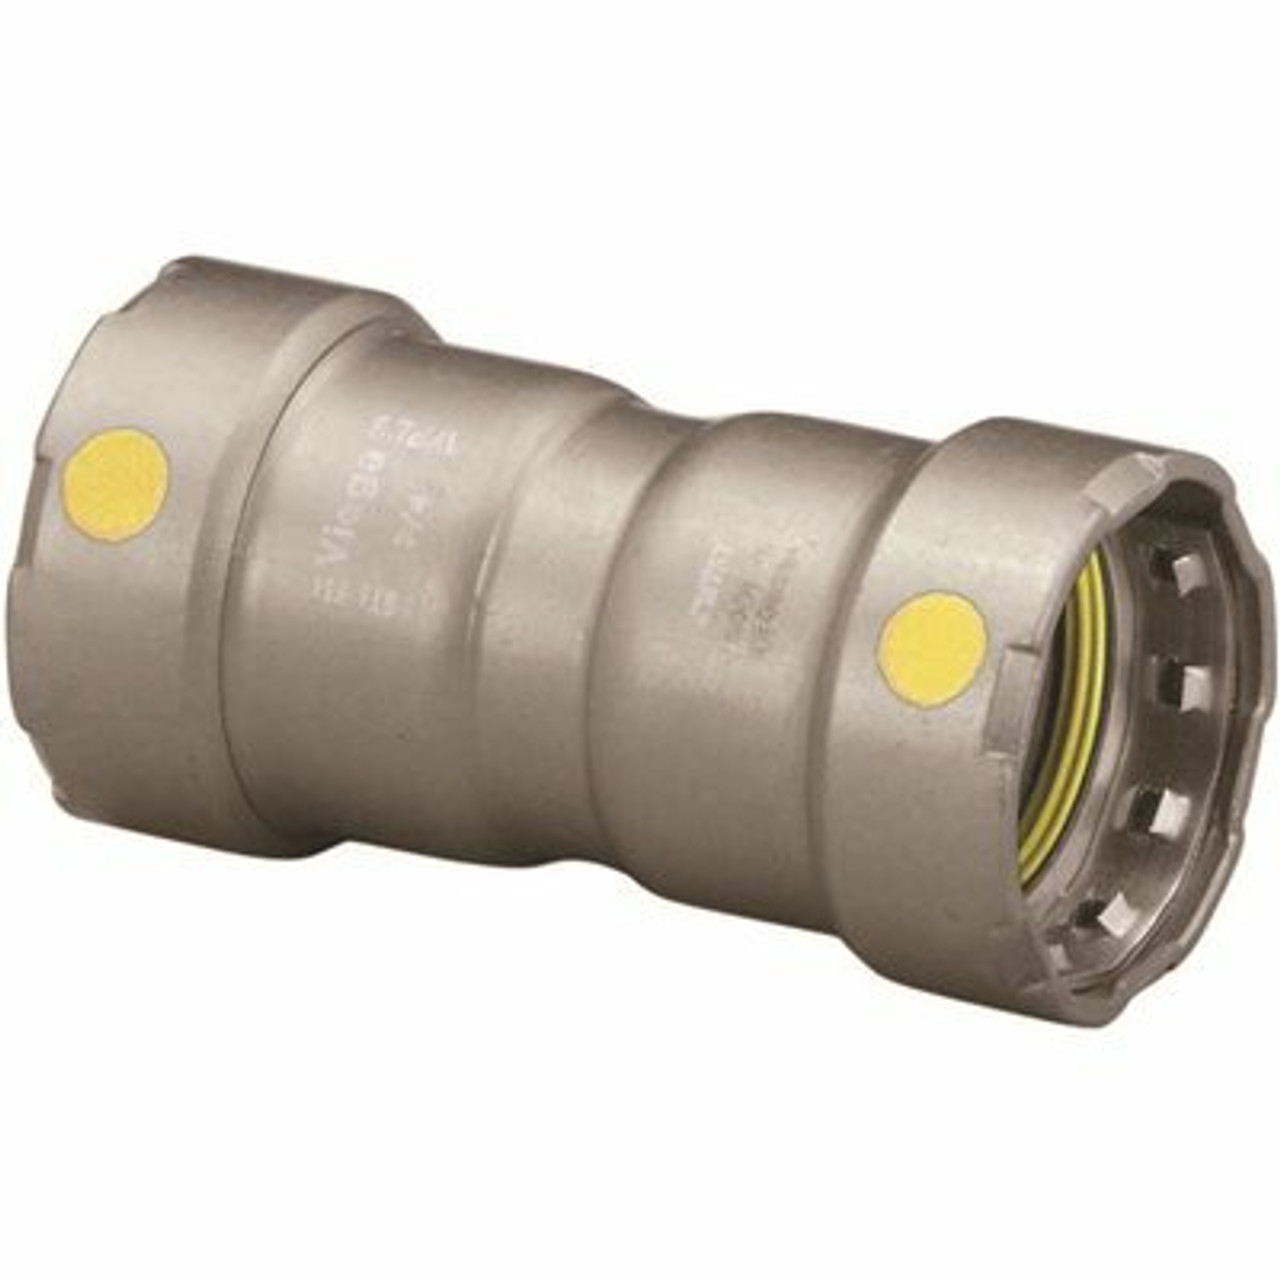 Viega 3/4 In. X 3/4 In. Carbon Steel Coupling With Stop